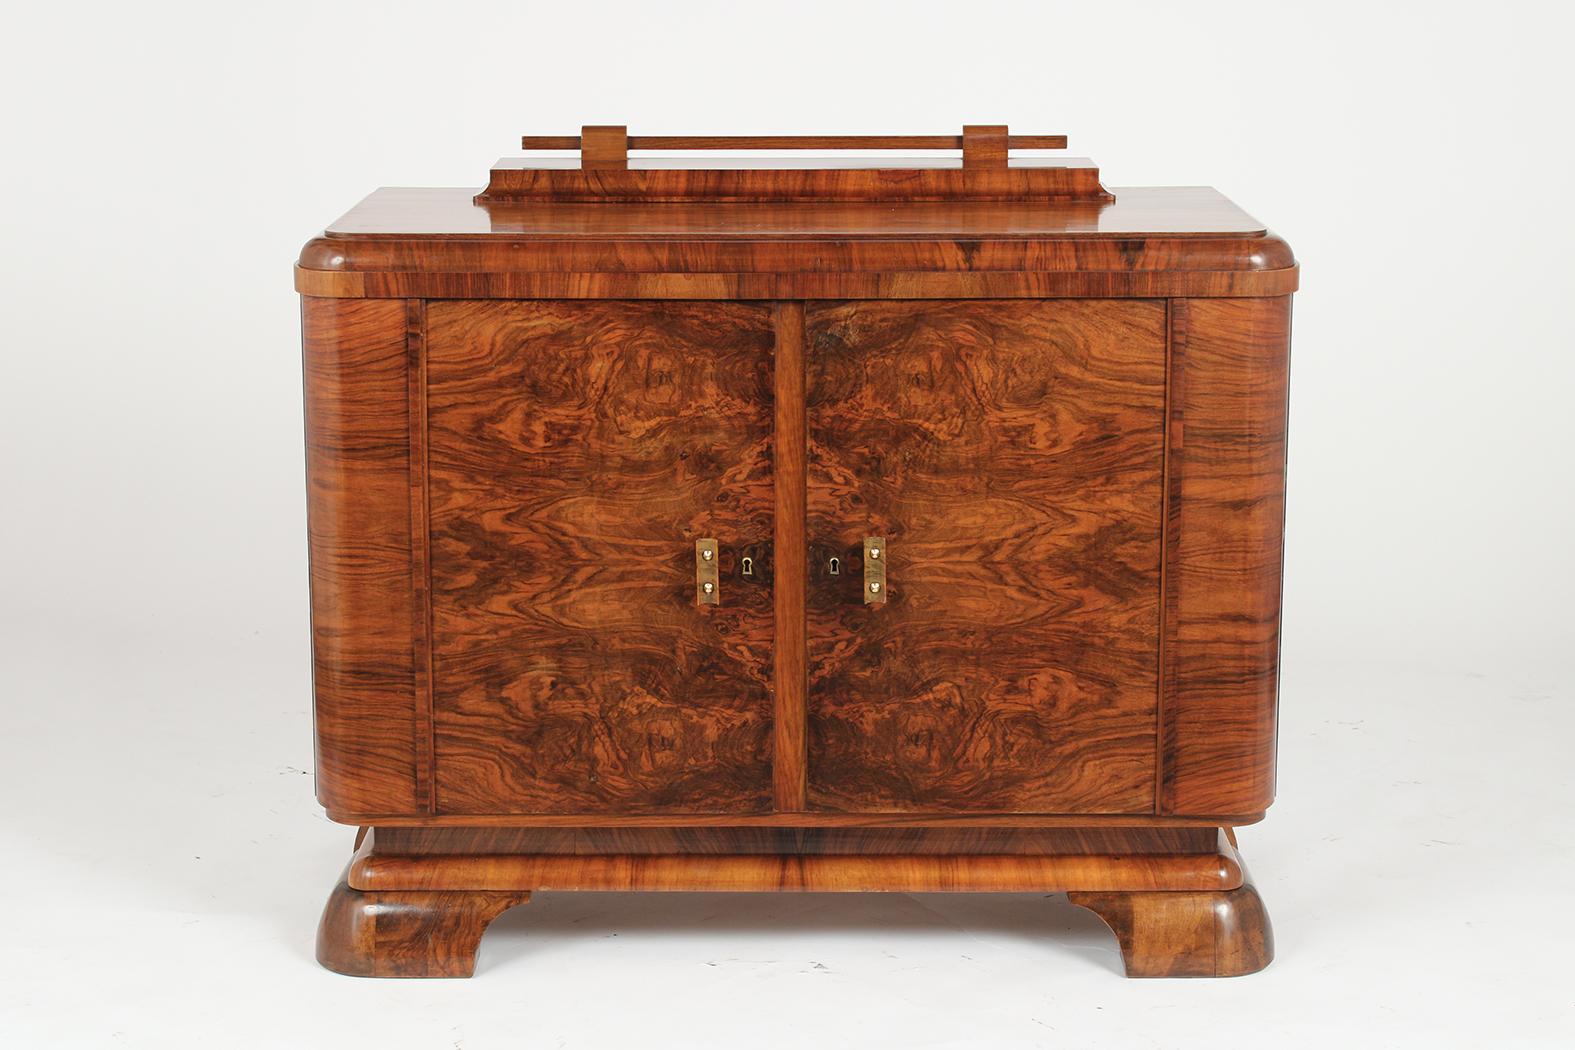 This French Art Deco Server has been professionally restored and is made out of walnut wood with its original finish that has just been newly waxed & polished. This Server has a unique design and features a wooden top and curved side design.- The